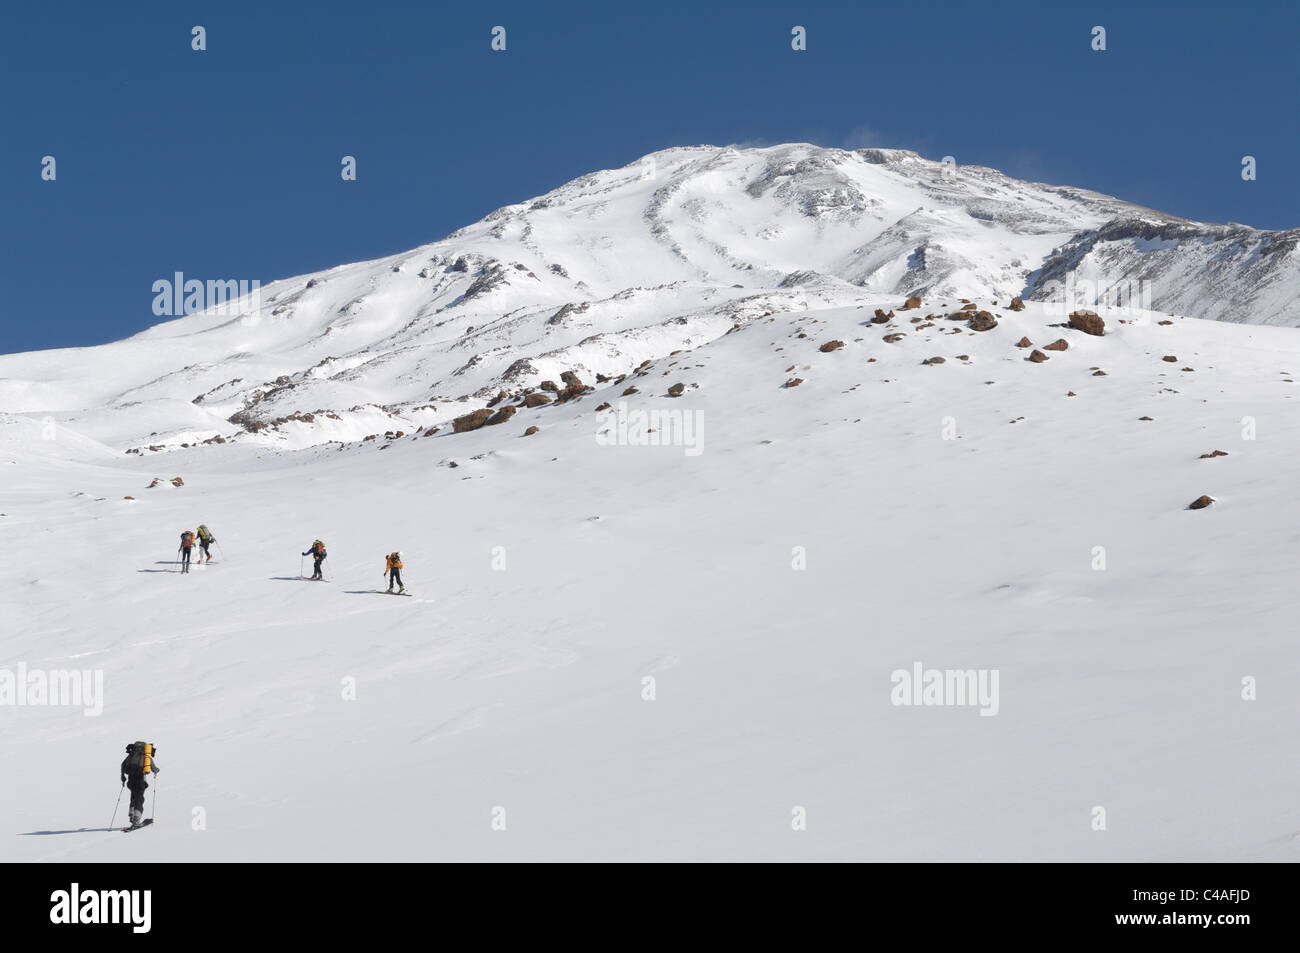 A group of ski mountaineers skinning up hill on the lower slopes of Mount Damavand in Iran Stock Photo